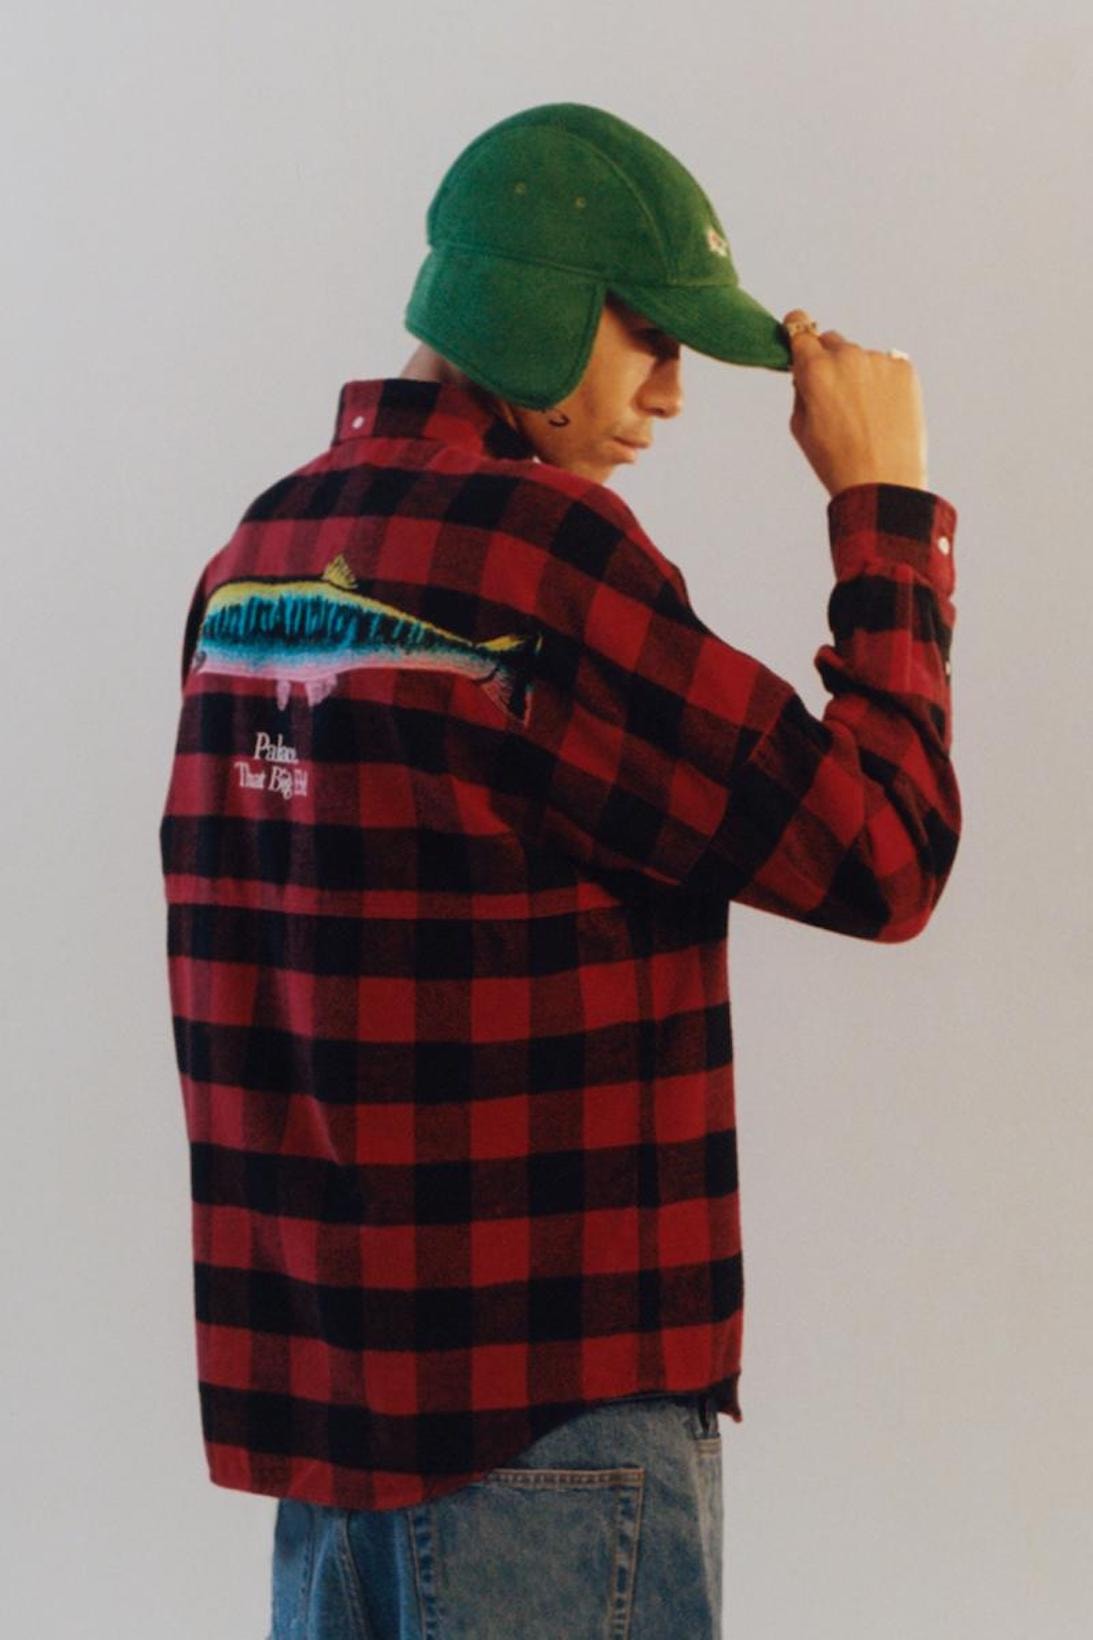 palace skateboards spring summer collection lookbook hat flannel jeans